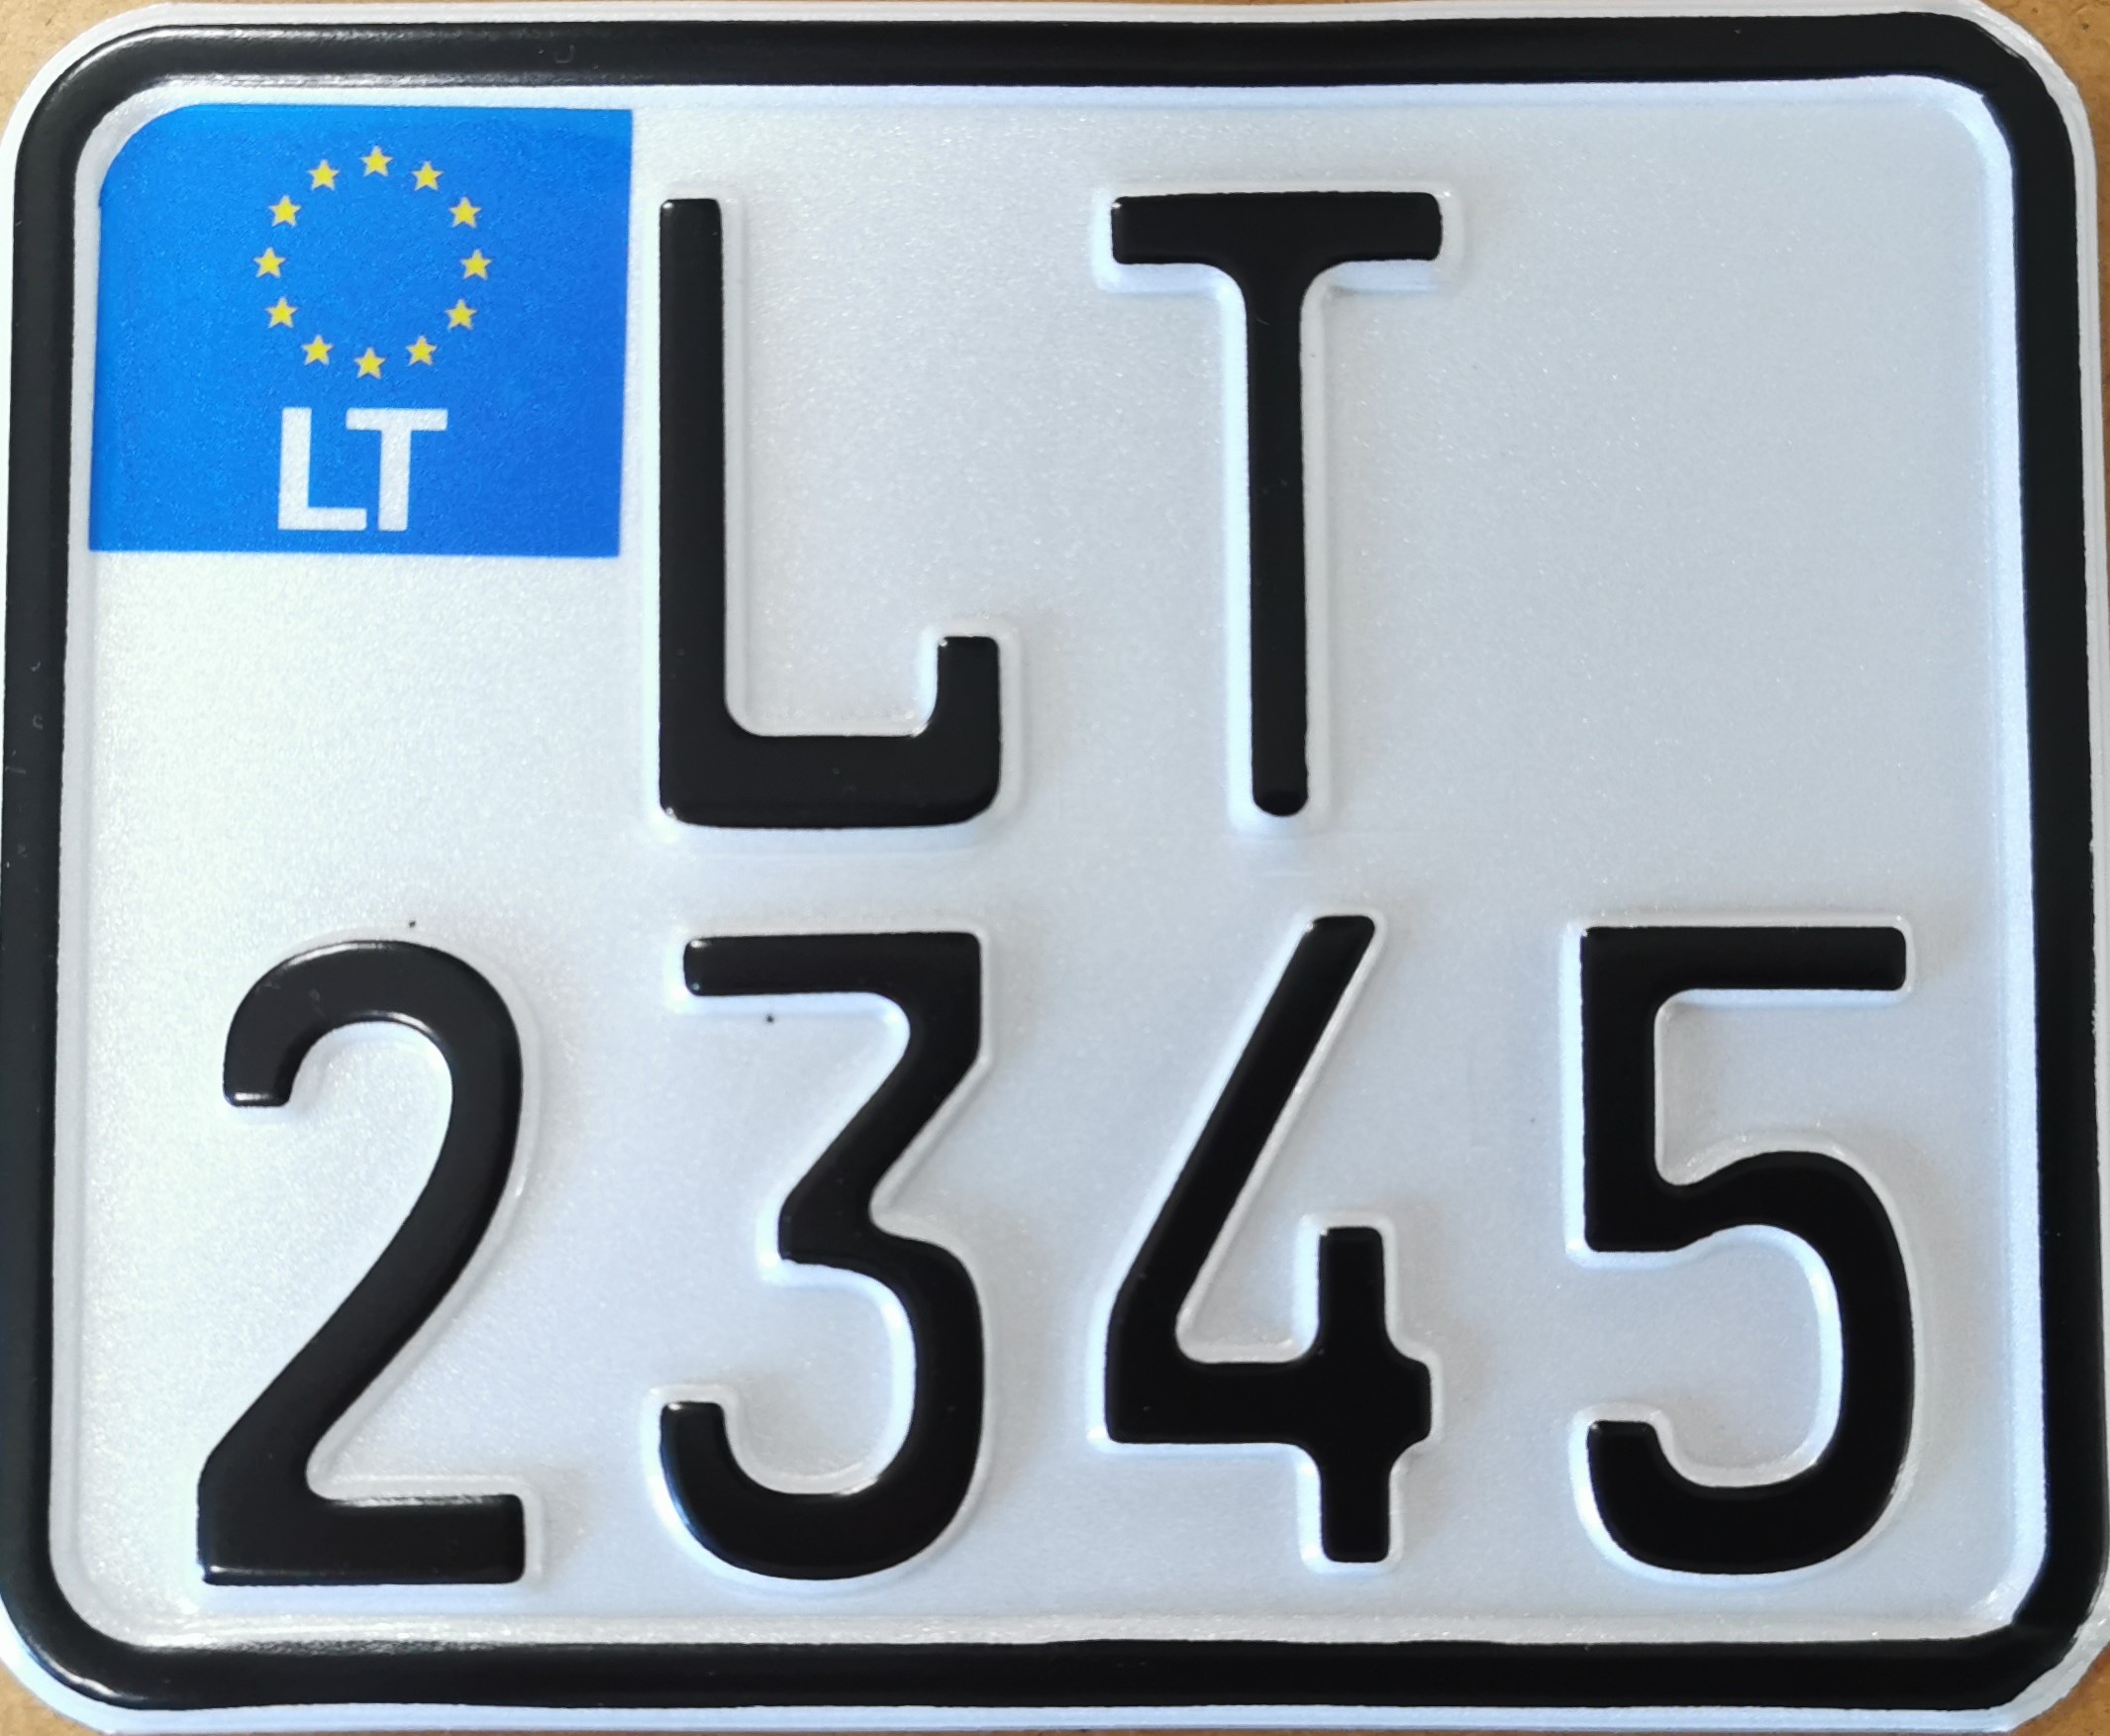 03. Lithuanian MC plate with EU-sign - Crossfighter 140 x 110 mm